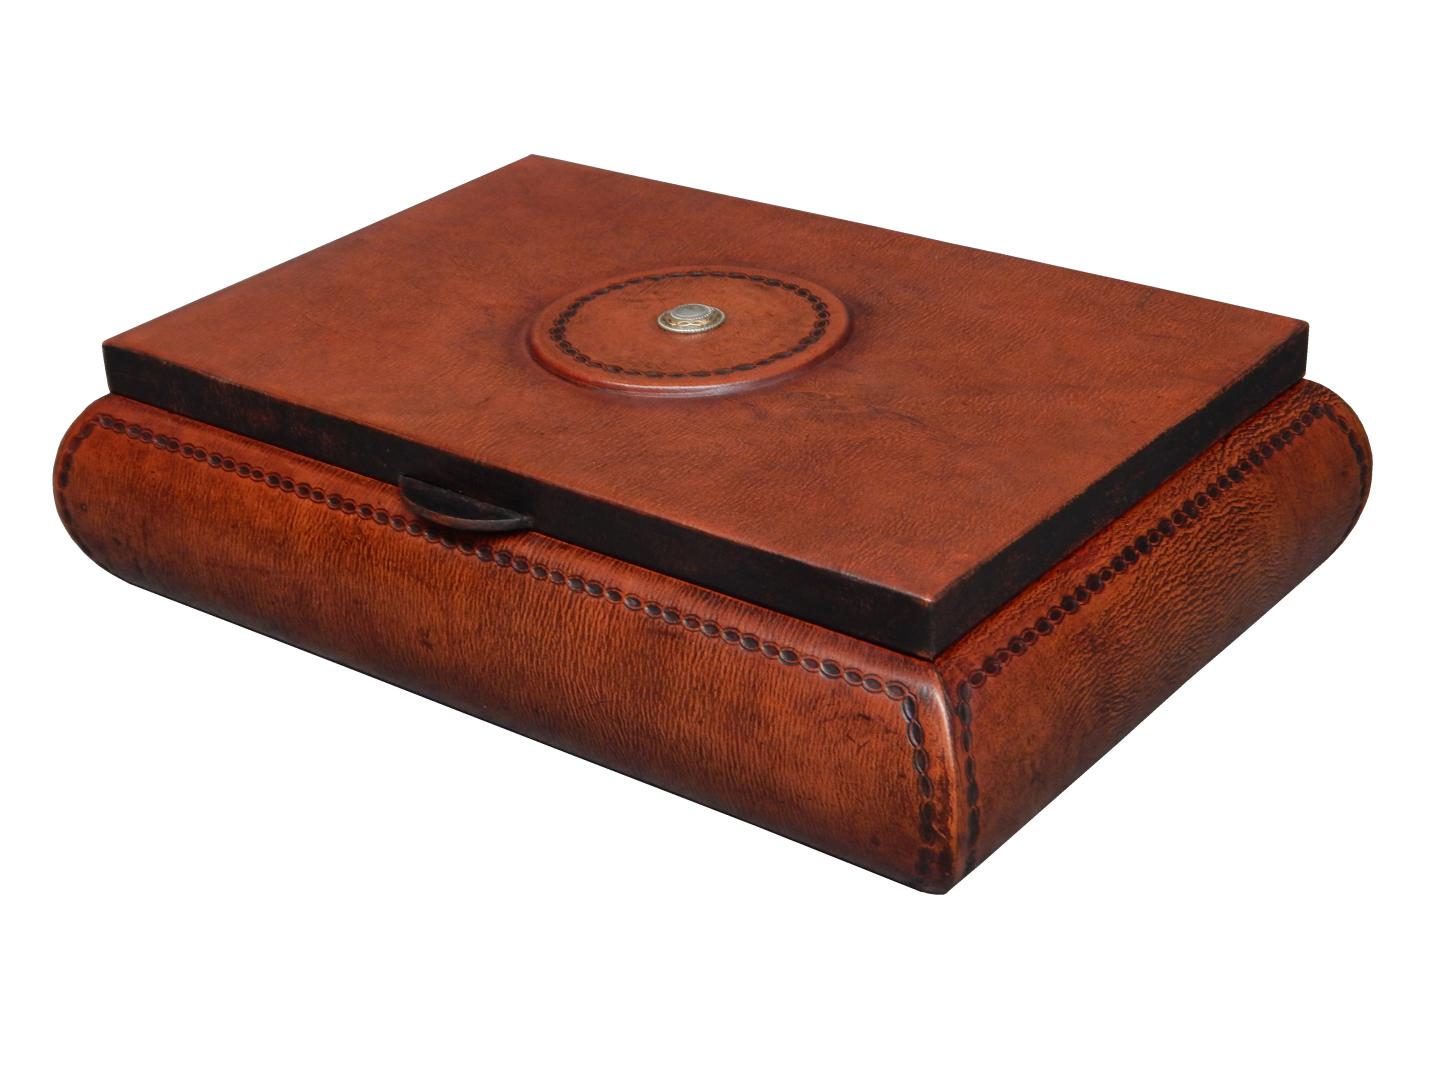 leather box with beautiful concho design on the top and wire design around the piece